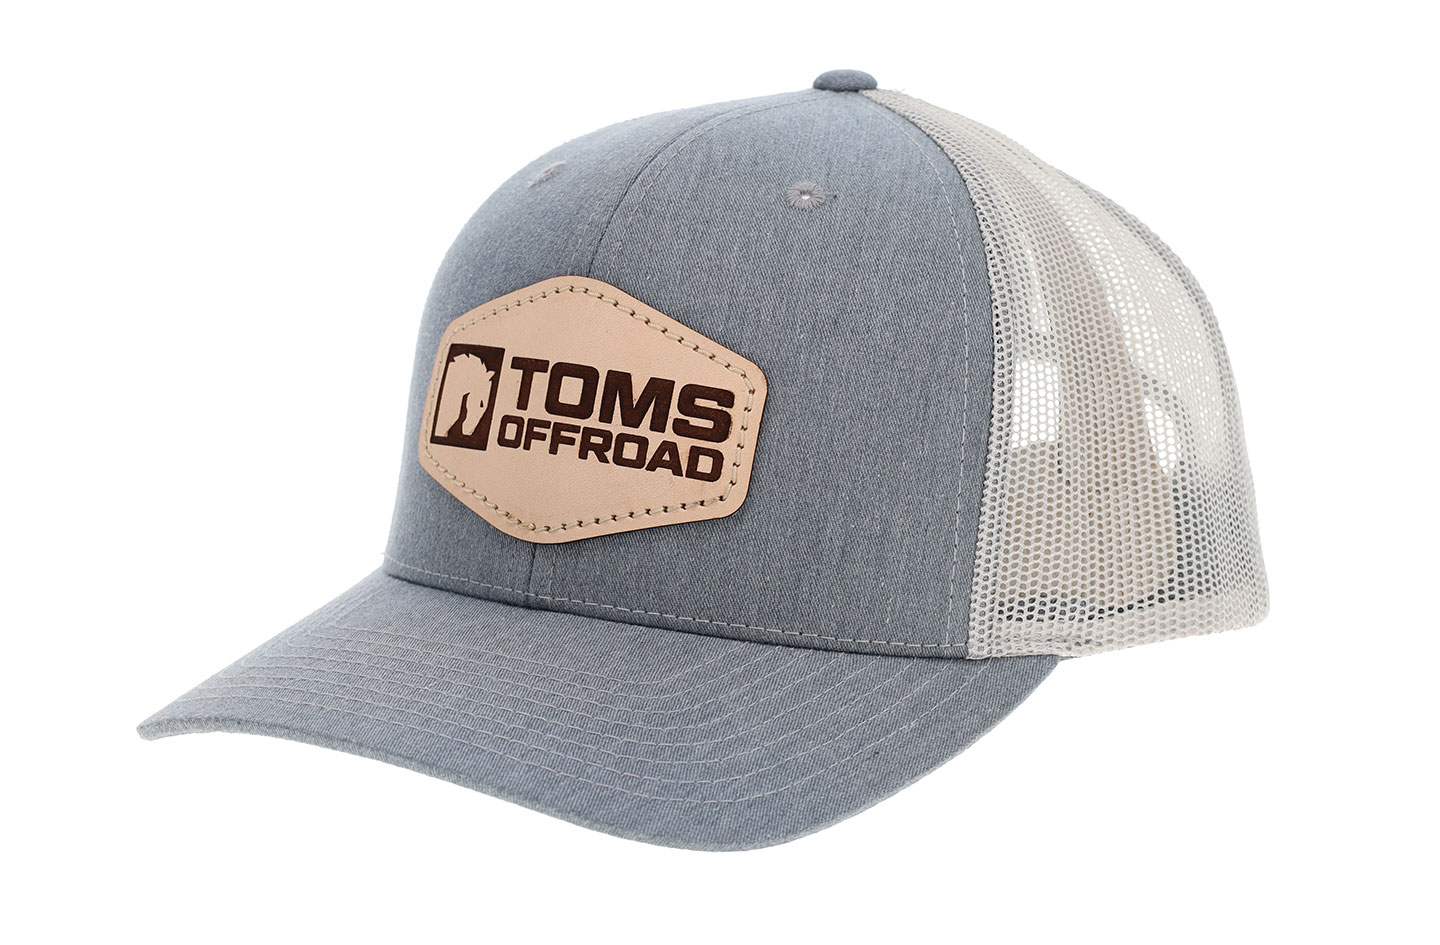 TOMS OFFROAD Hat - Heather Gray with Offroad Patch